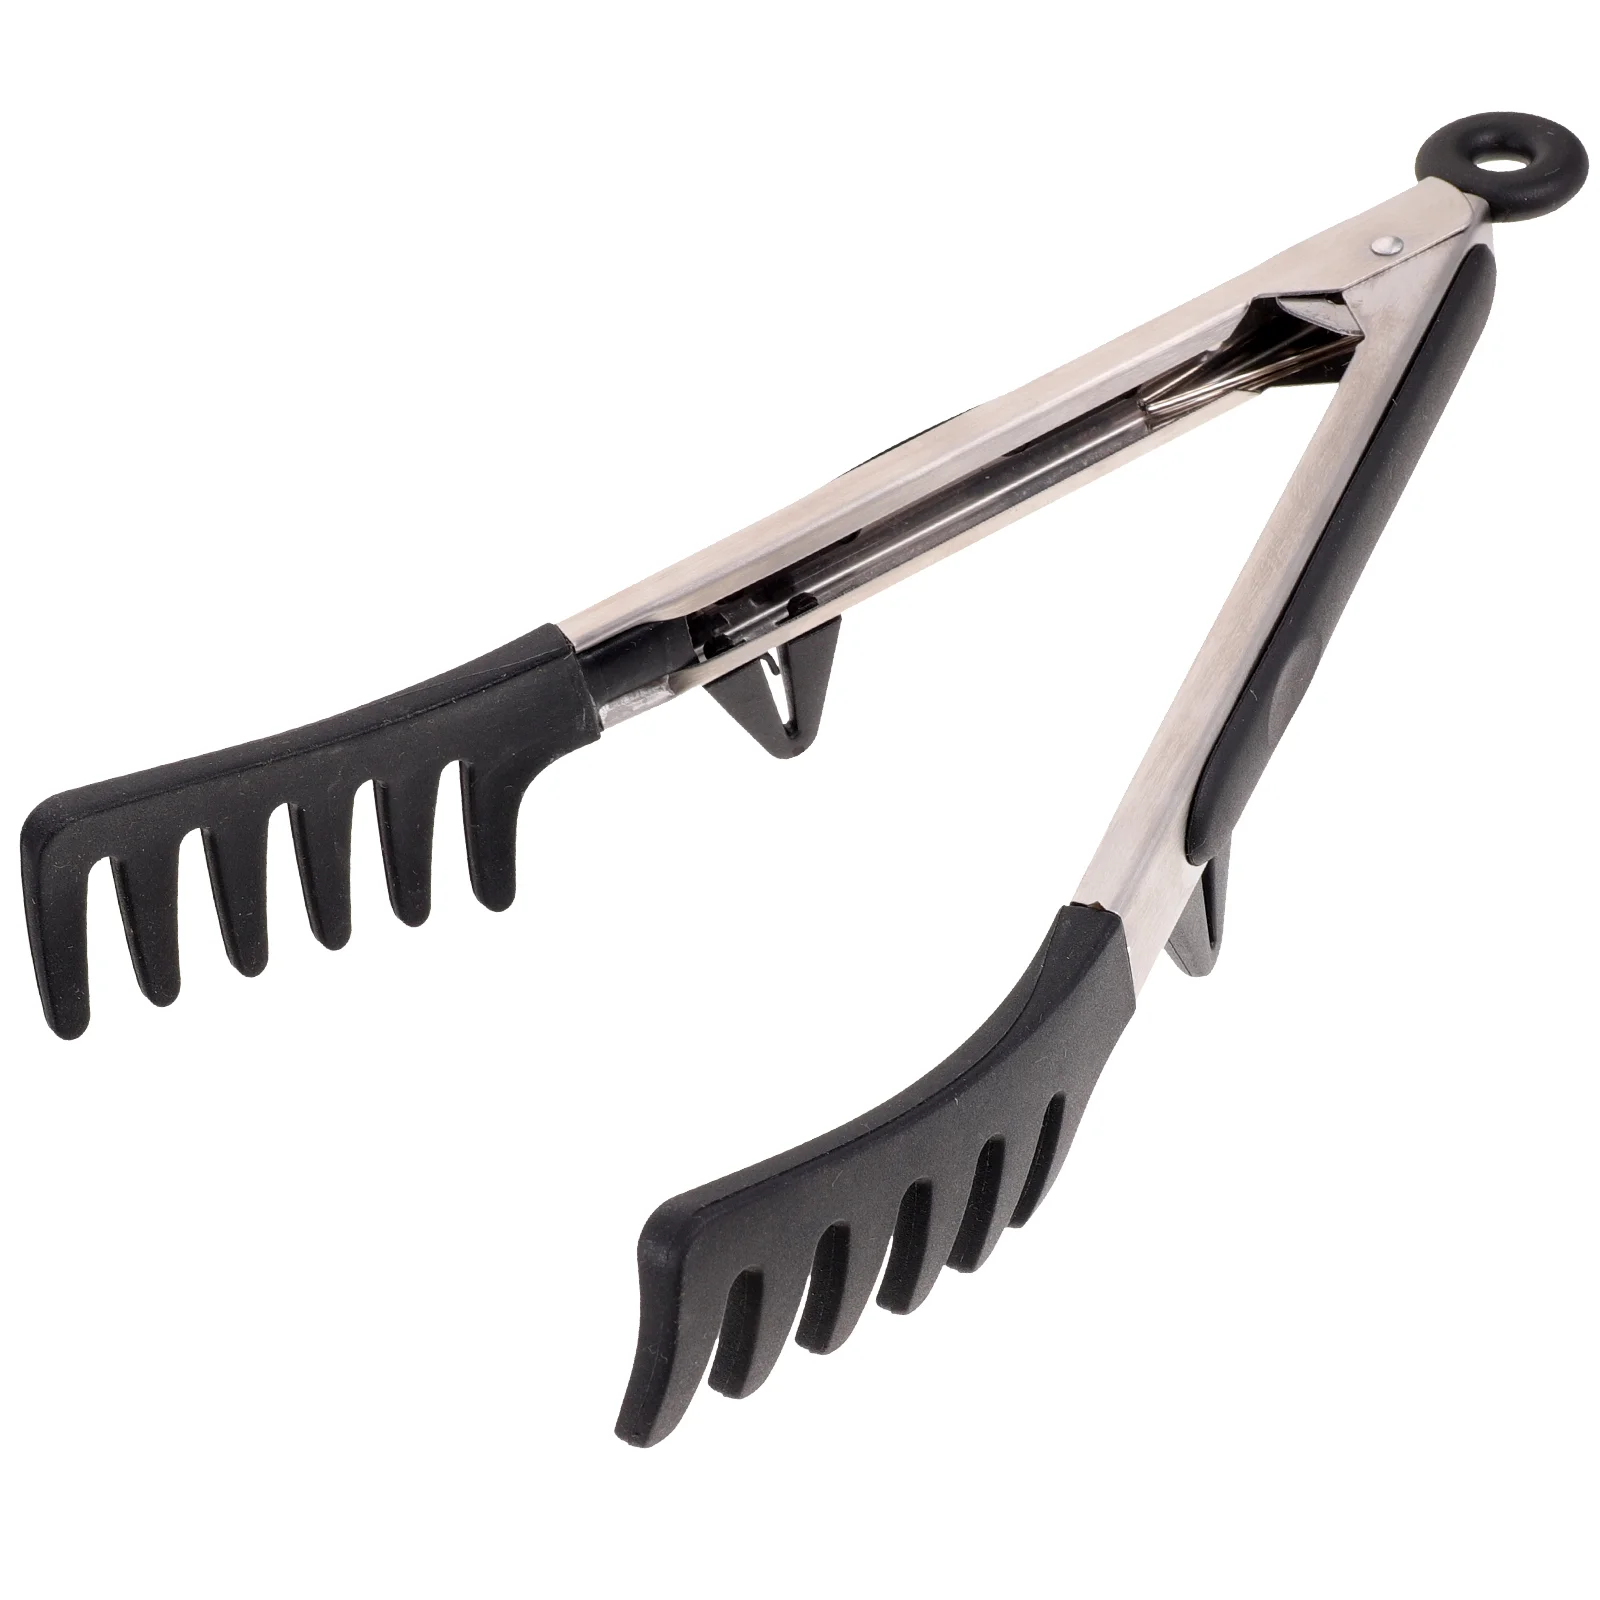 

Tongs Tong Pasta Clip Spaghetti Barbecue Kitchen Serving Bread Clamp Ice Silicone Metal Grilling Catering Buffet Grill Steak